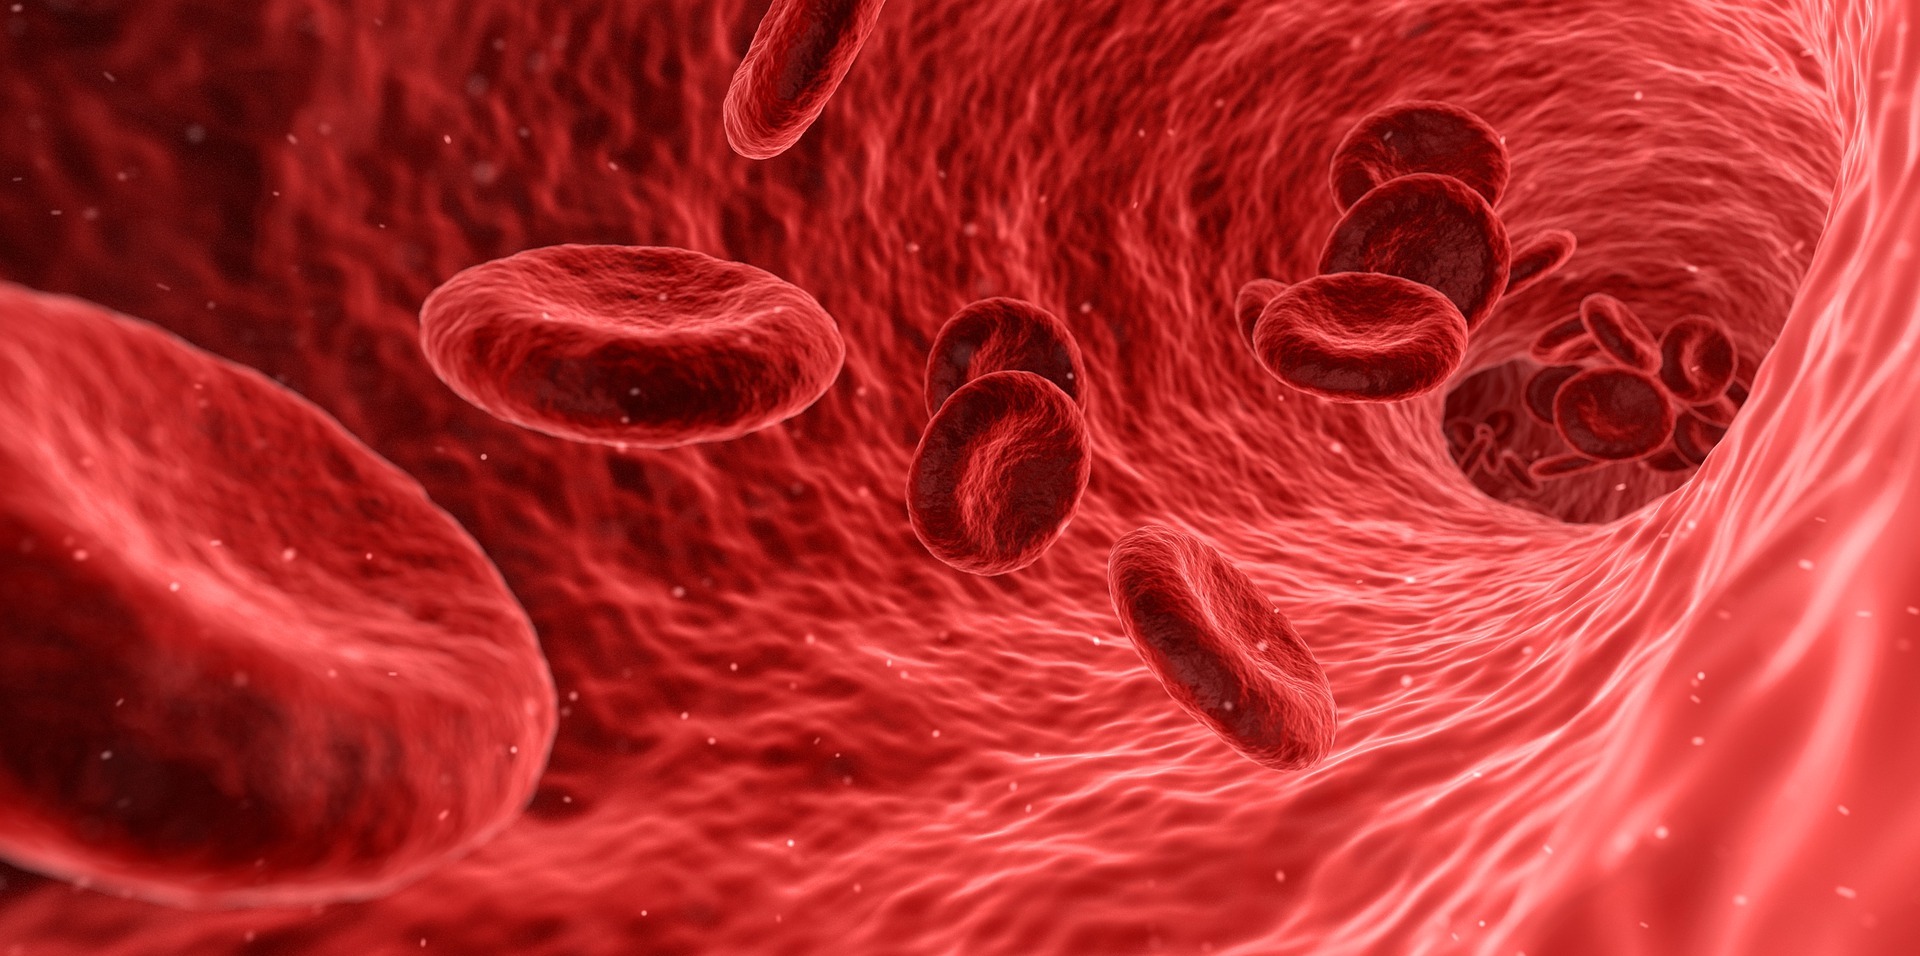 Red bood cells